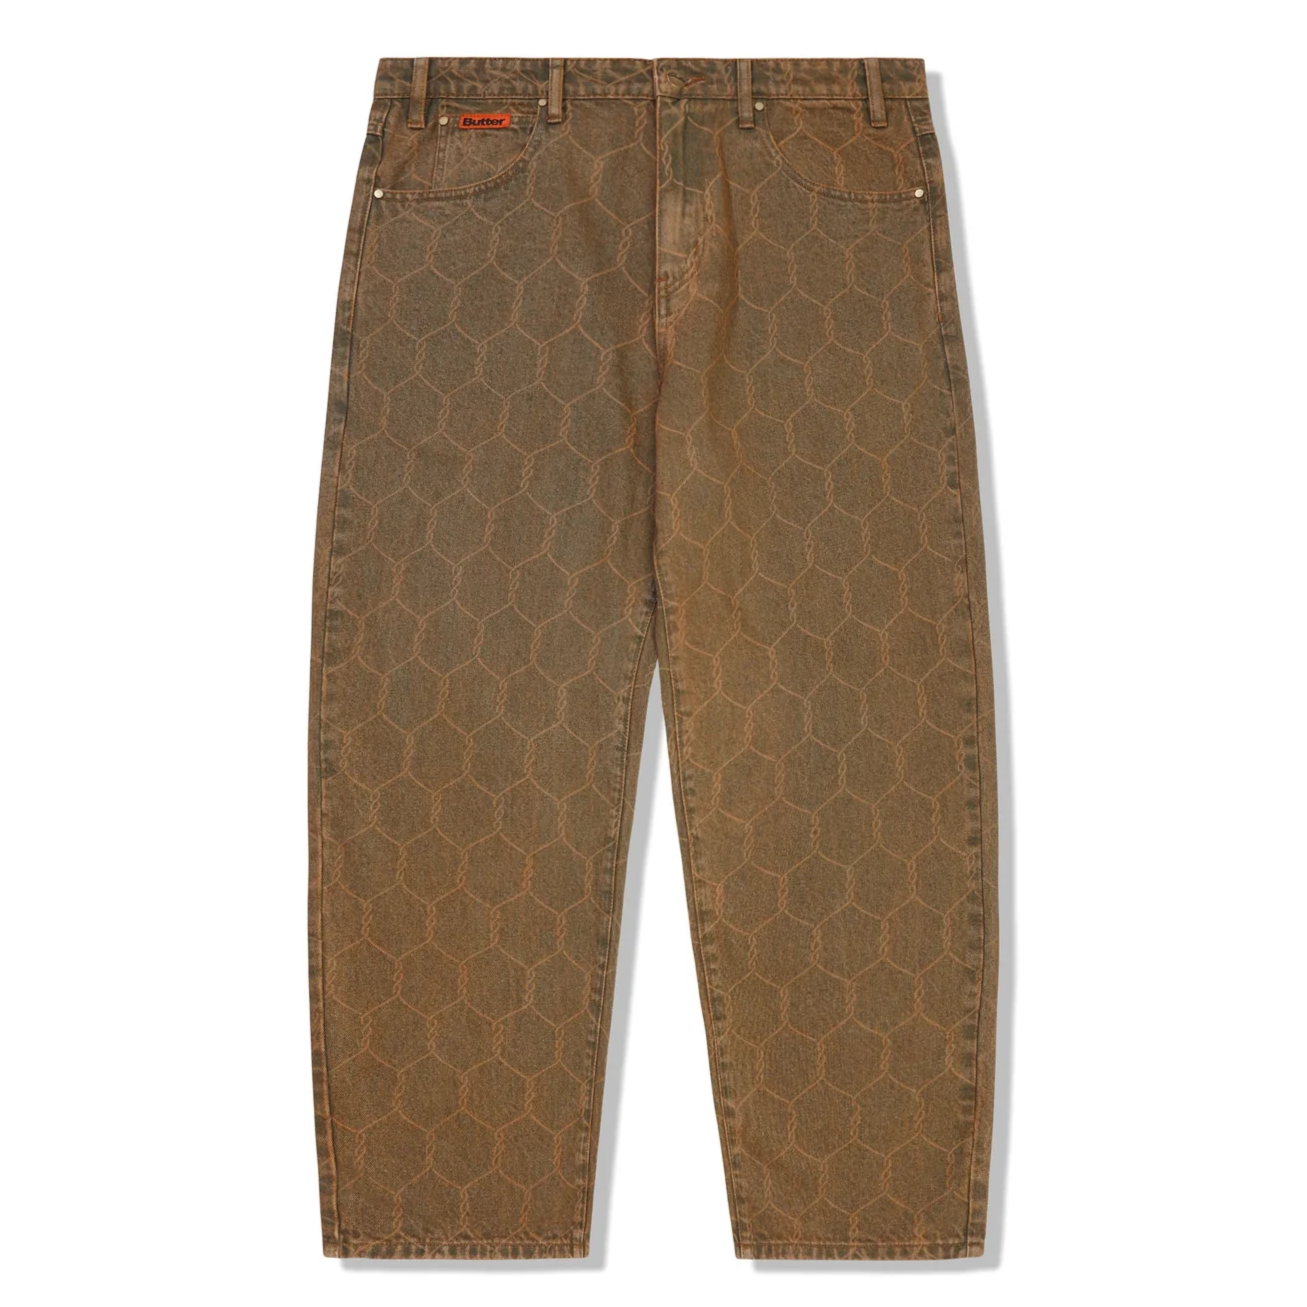 Butter Goods - Chain Link Denim Jeans - Washed Brown